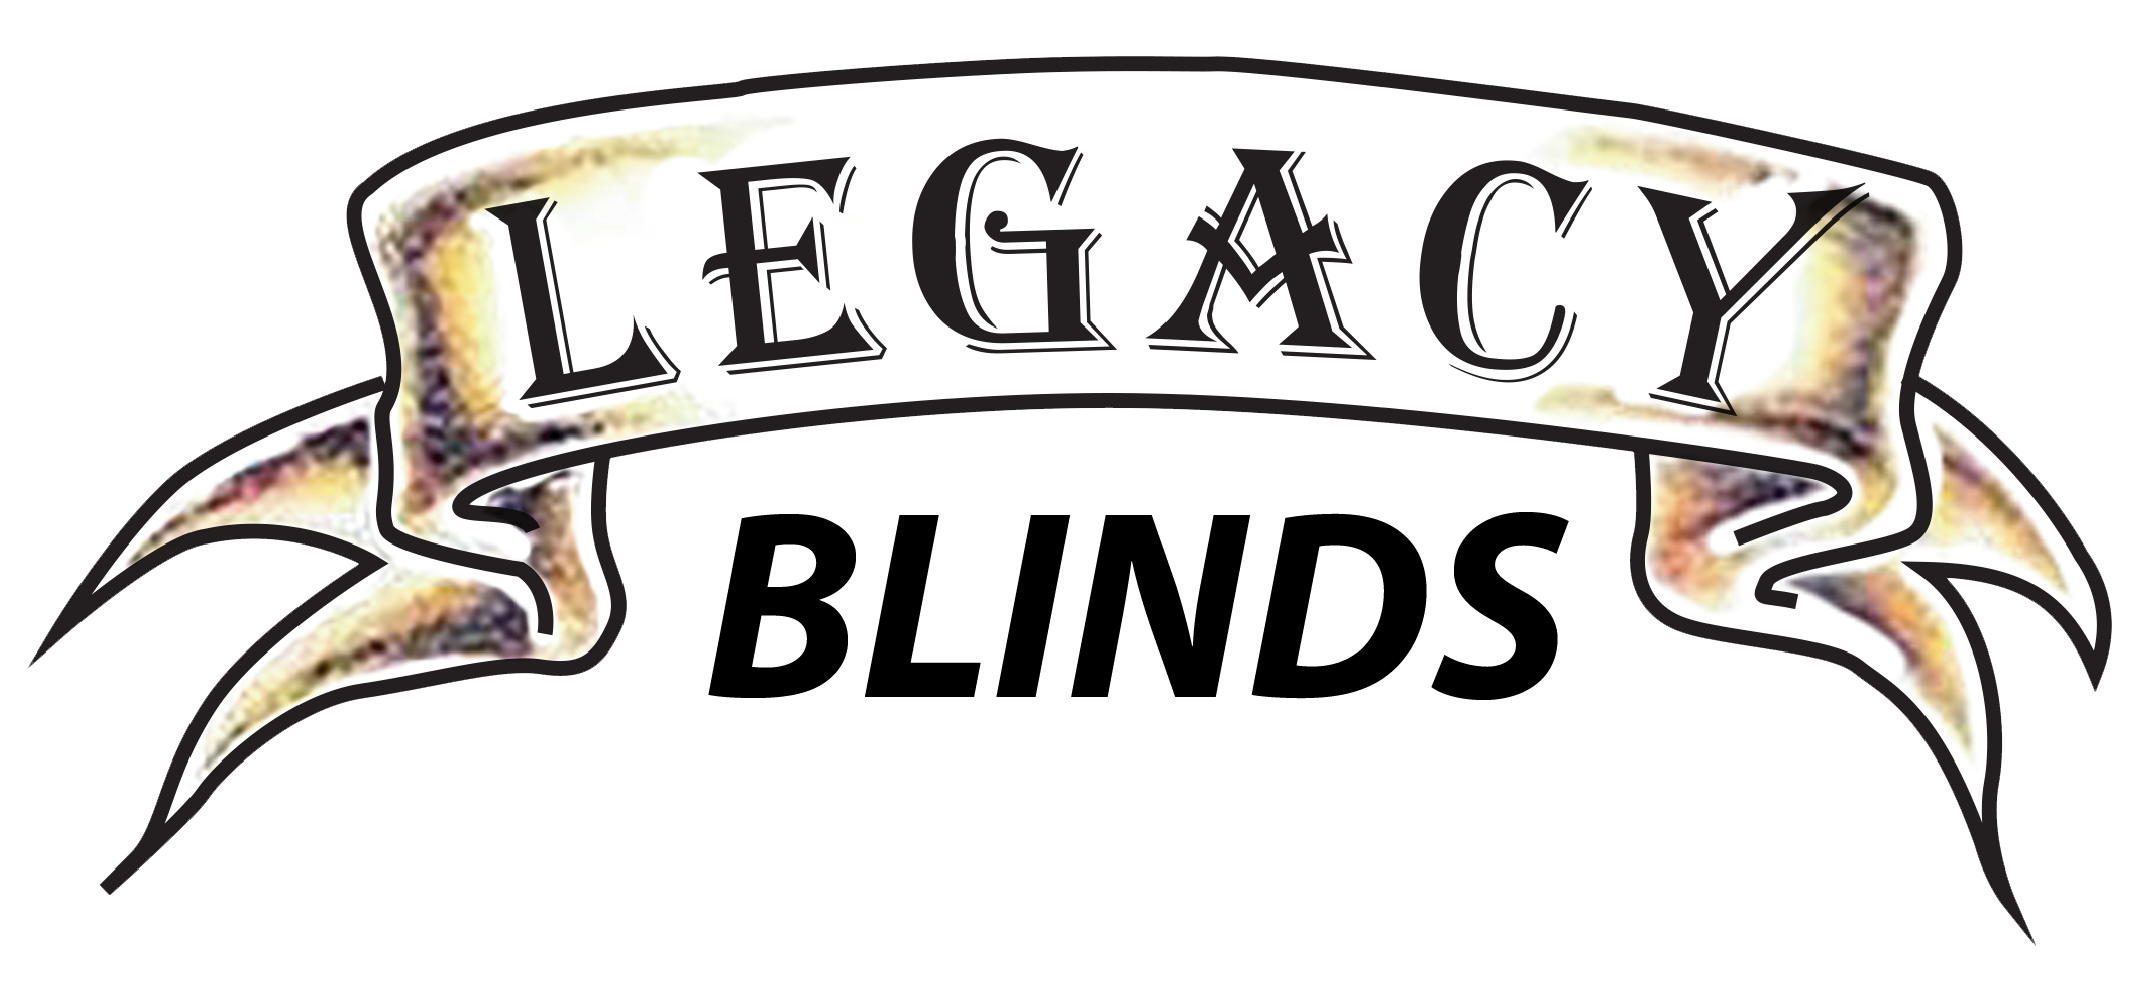 Legacy Blinds